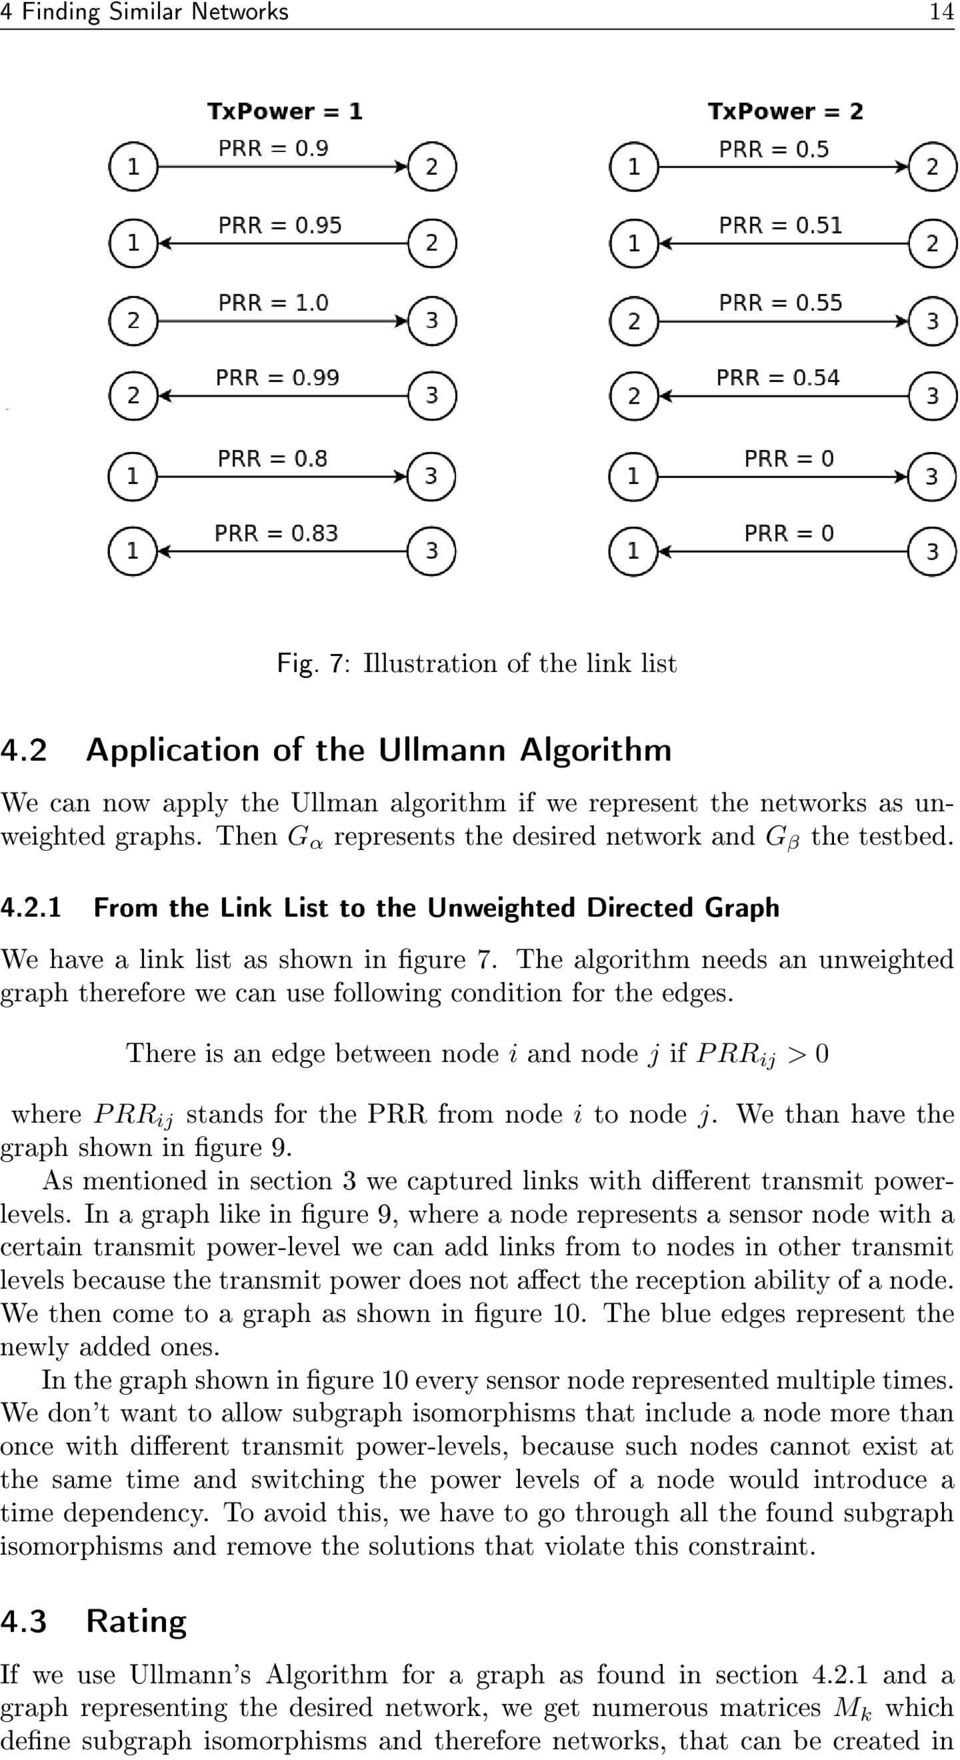 The algorithm needs an unweighted graph therefore we can use following condition for the edges.